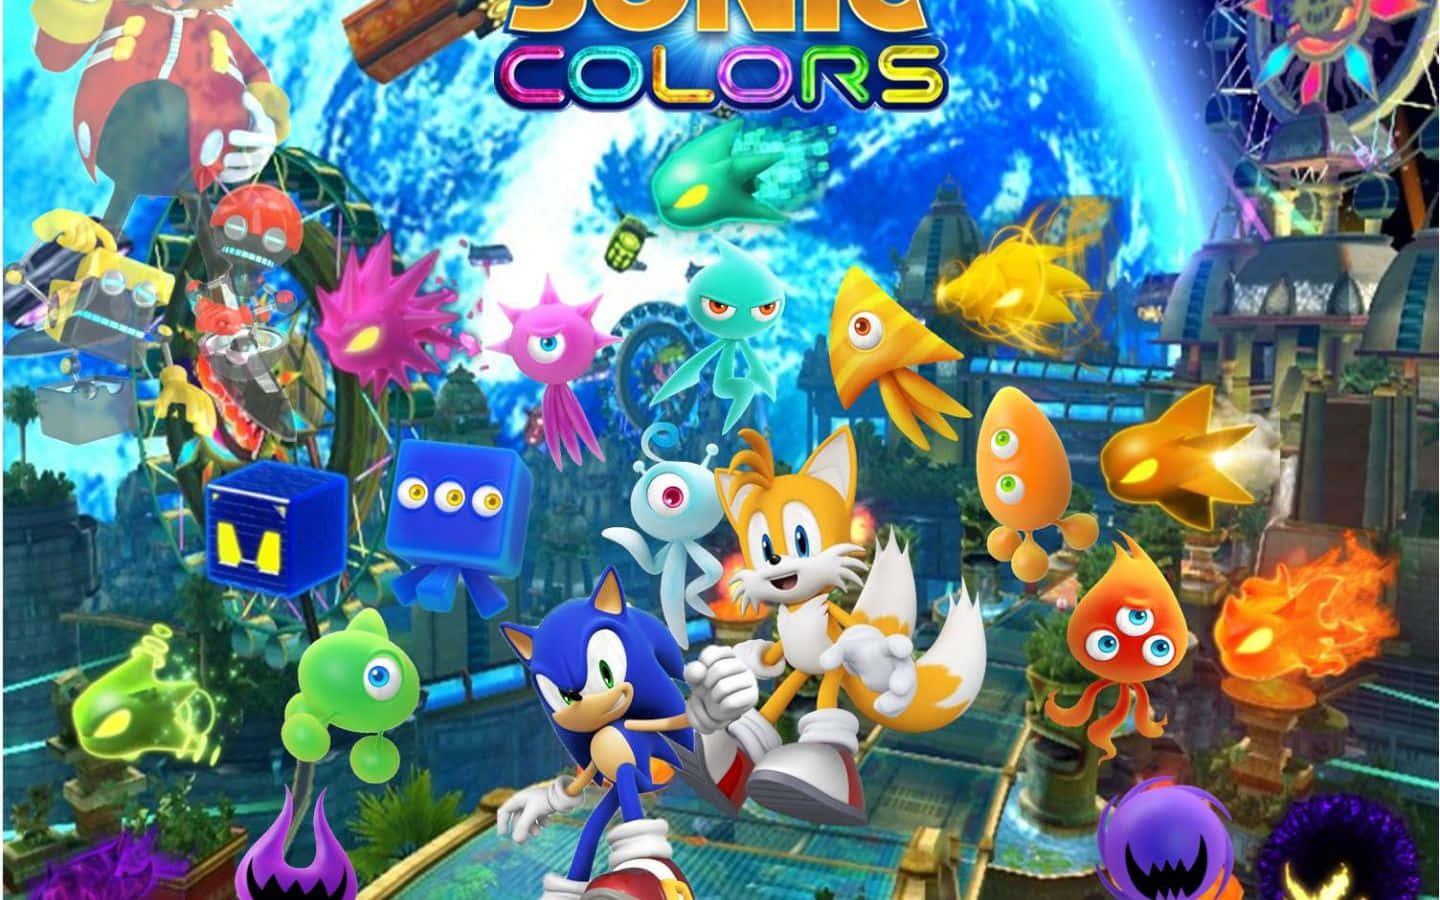 Sonic and his colorful friends Wallpaper